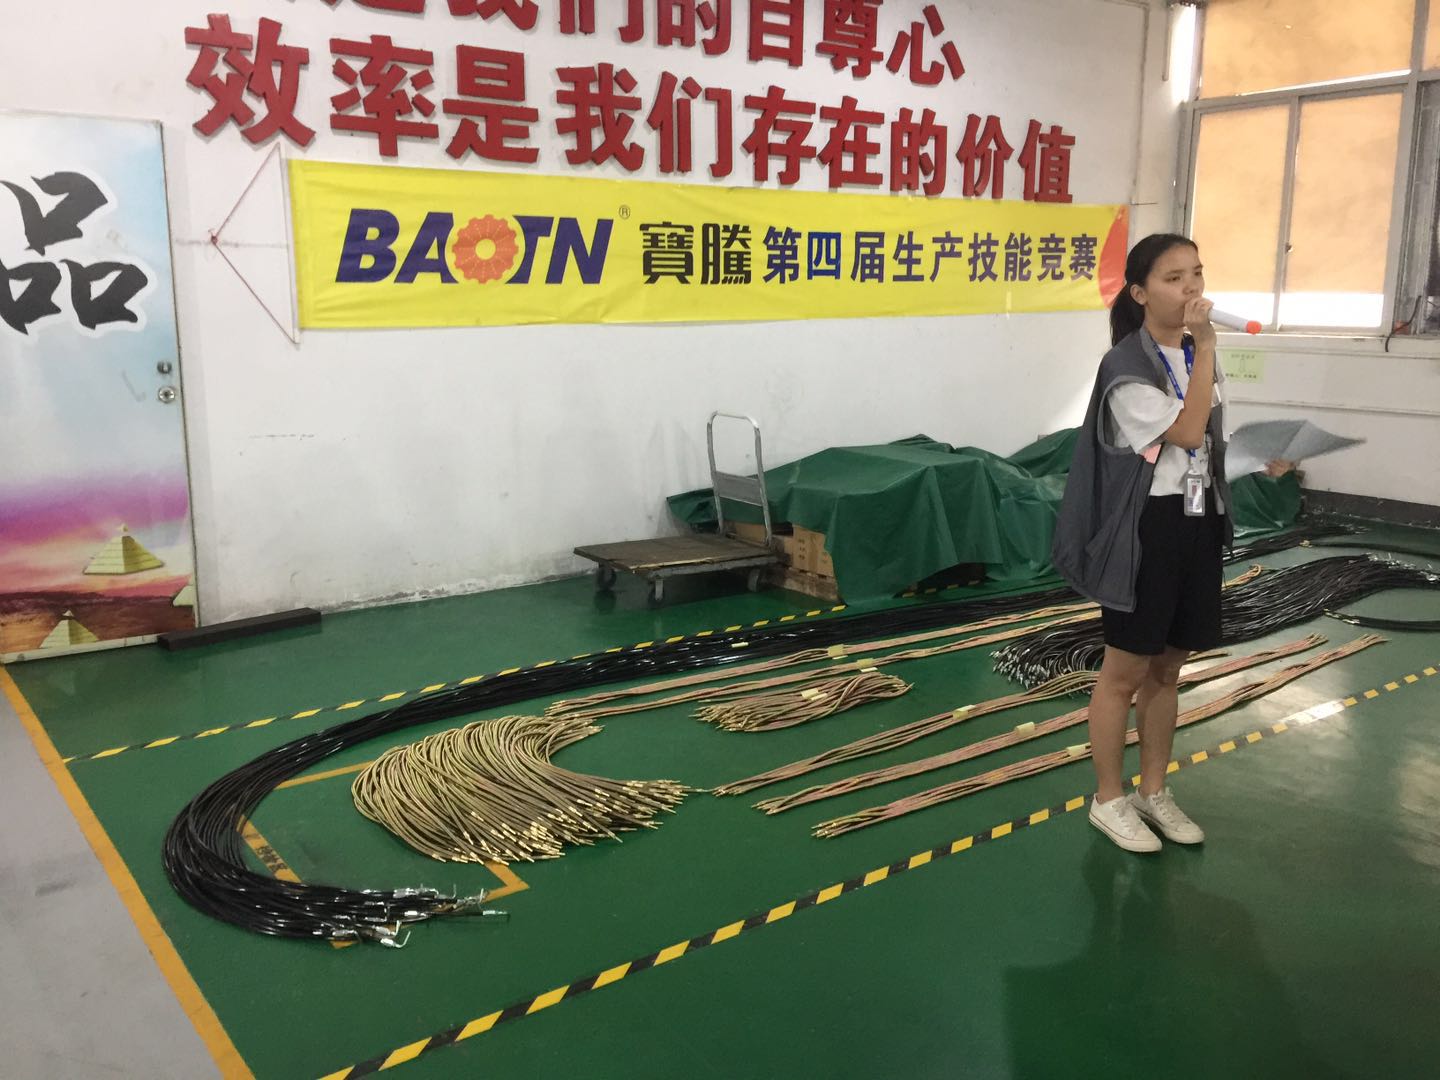 BAOTN——Production skills competition